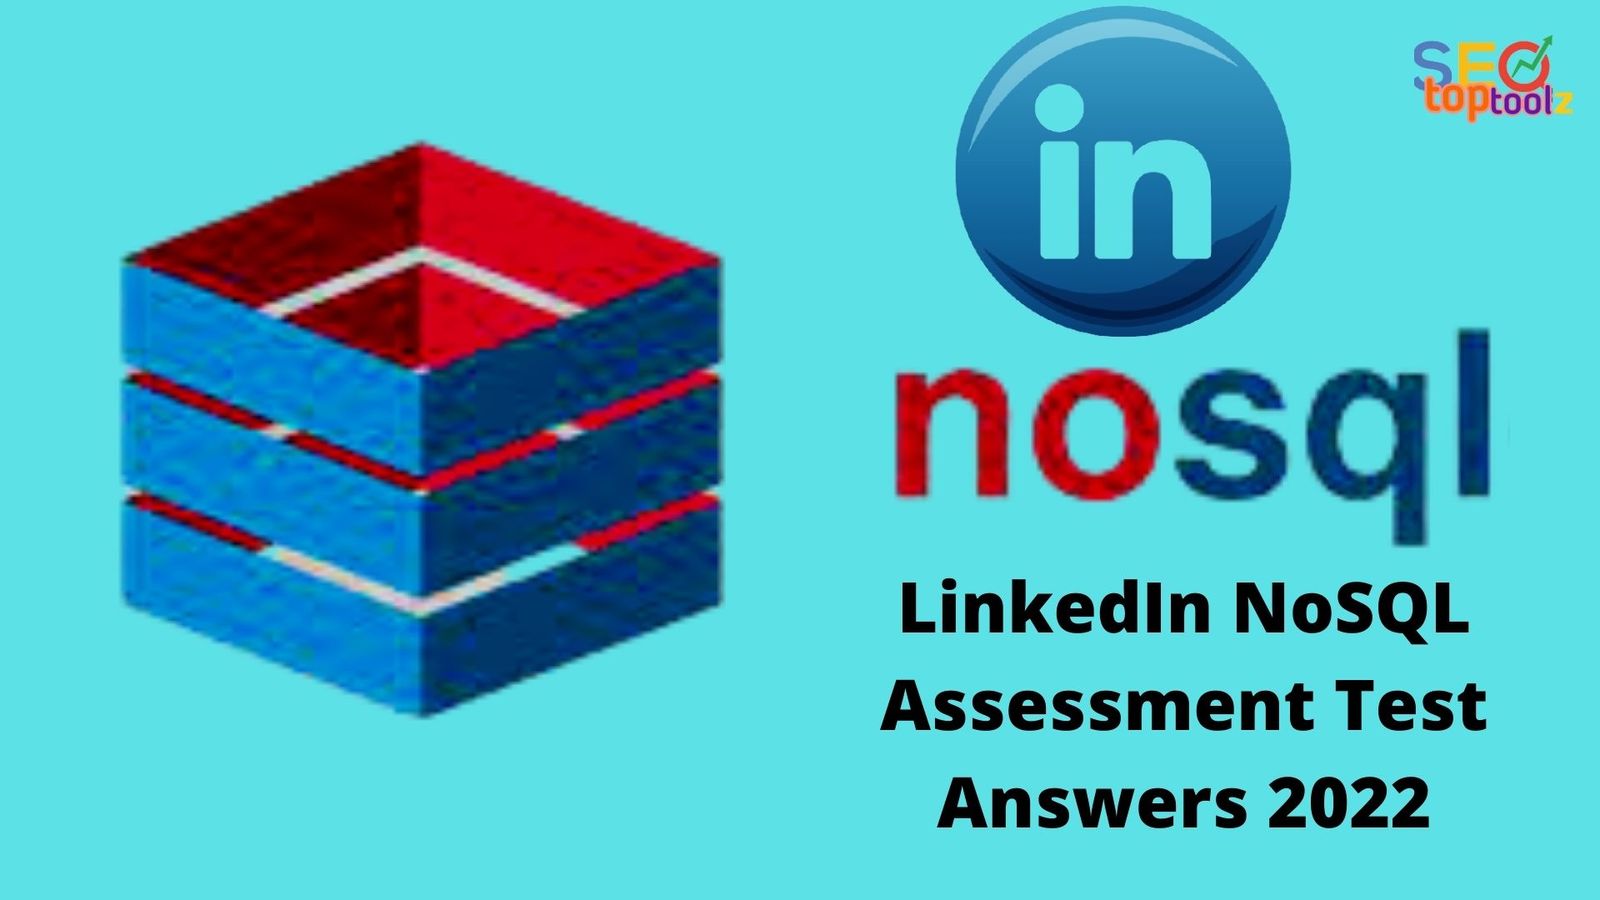 LinkedIn NoSQL Assessment Test Answers 2022,Access database practice test, access skills test, How to Pass Microsoft Access Test, LinkedIn Angularjs Assessment Test Answers 2022, LinkedIn Microsoft Access Assessment Answers 2022- LinkedIn Microsoft Access Skill Quiz.